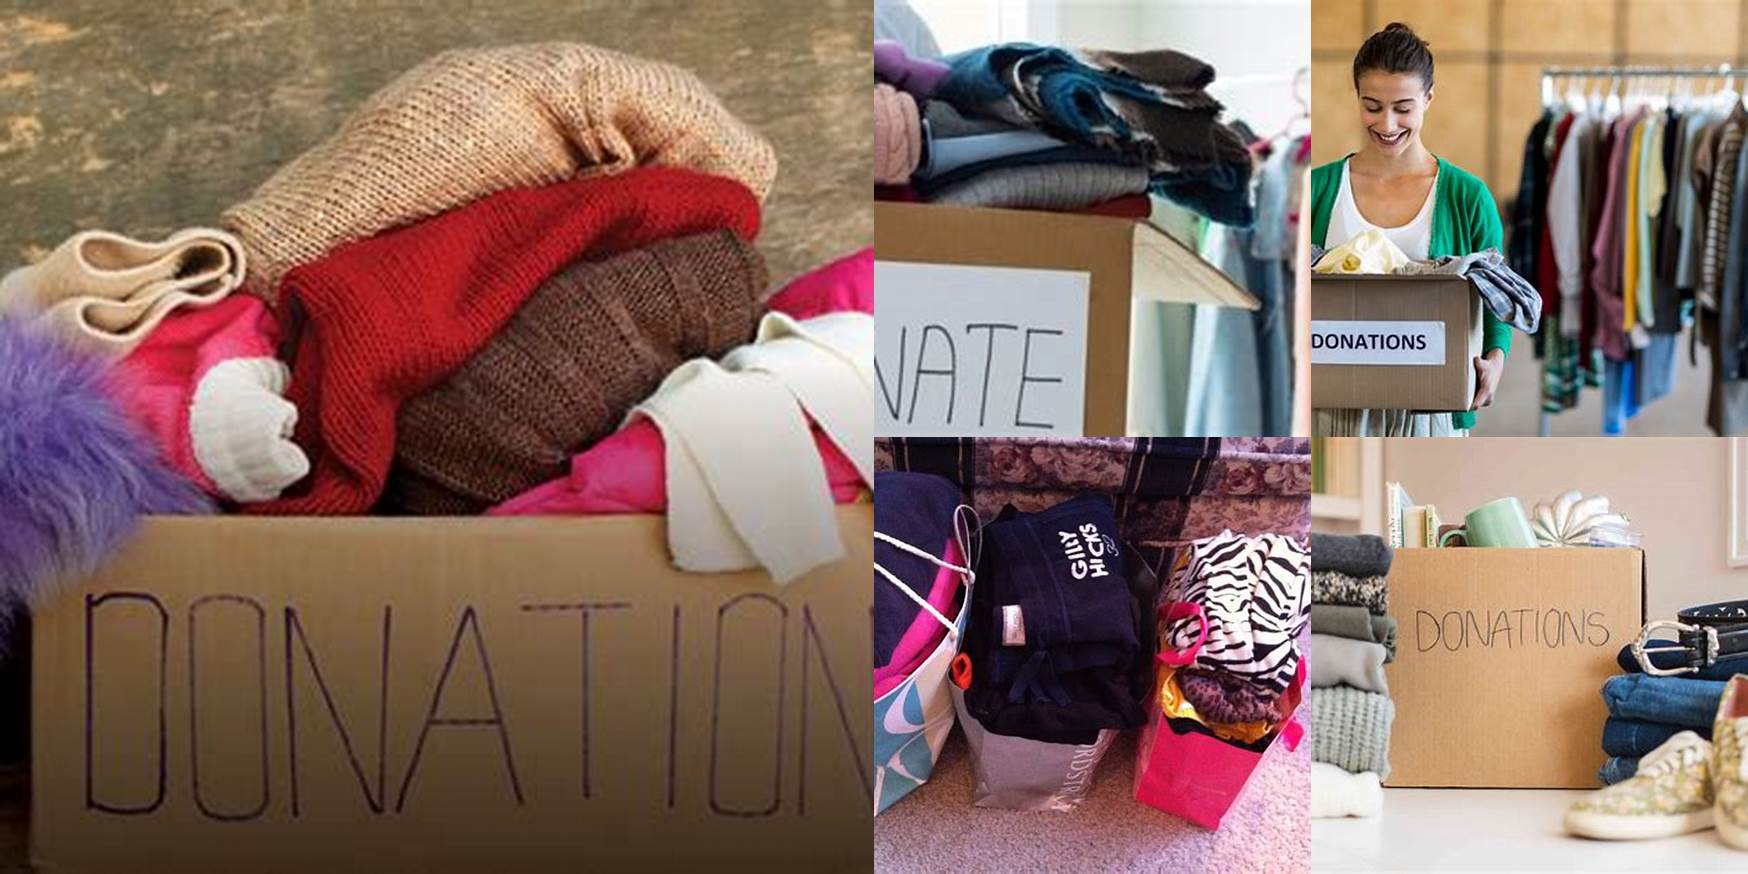 How To Donate Clothes To Women's Shelter